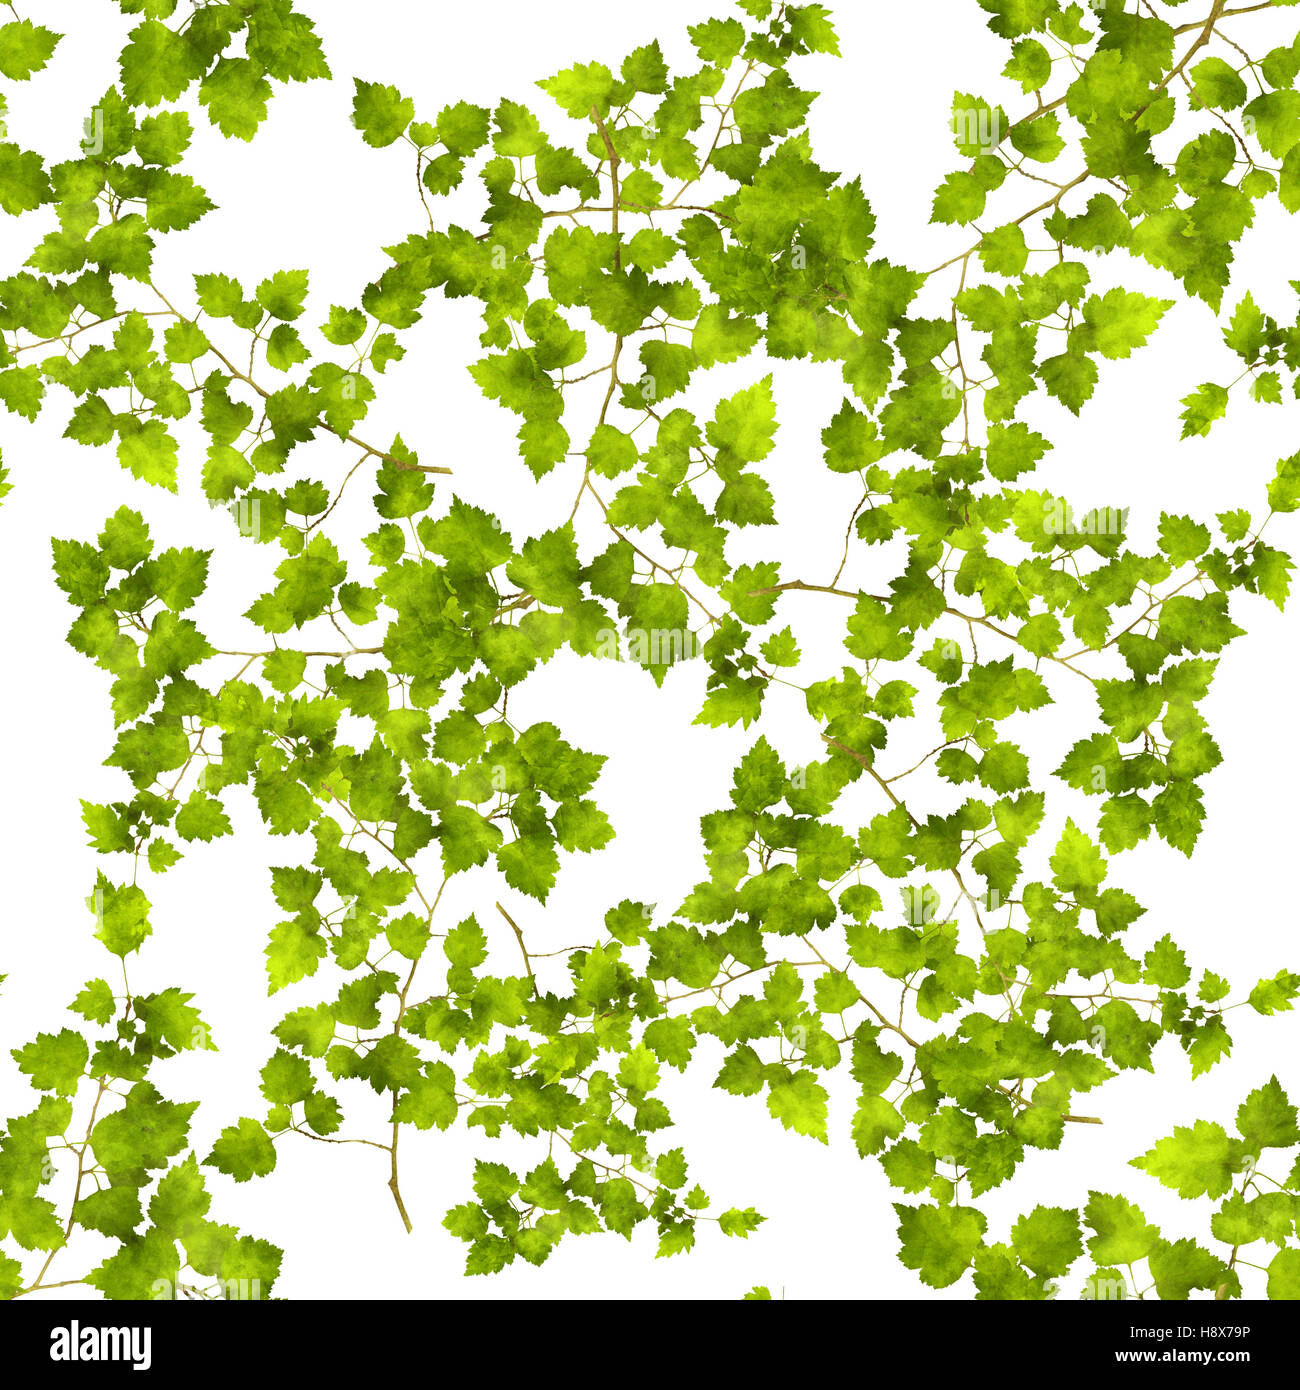 Green leaf seamless repeating pattern Stock Photo